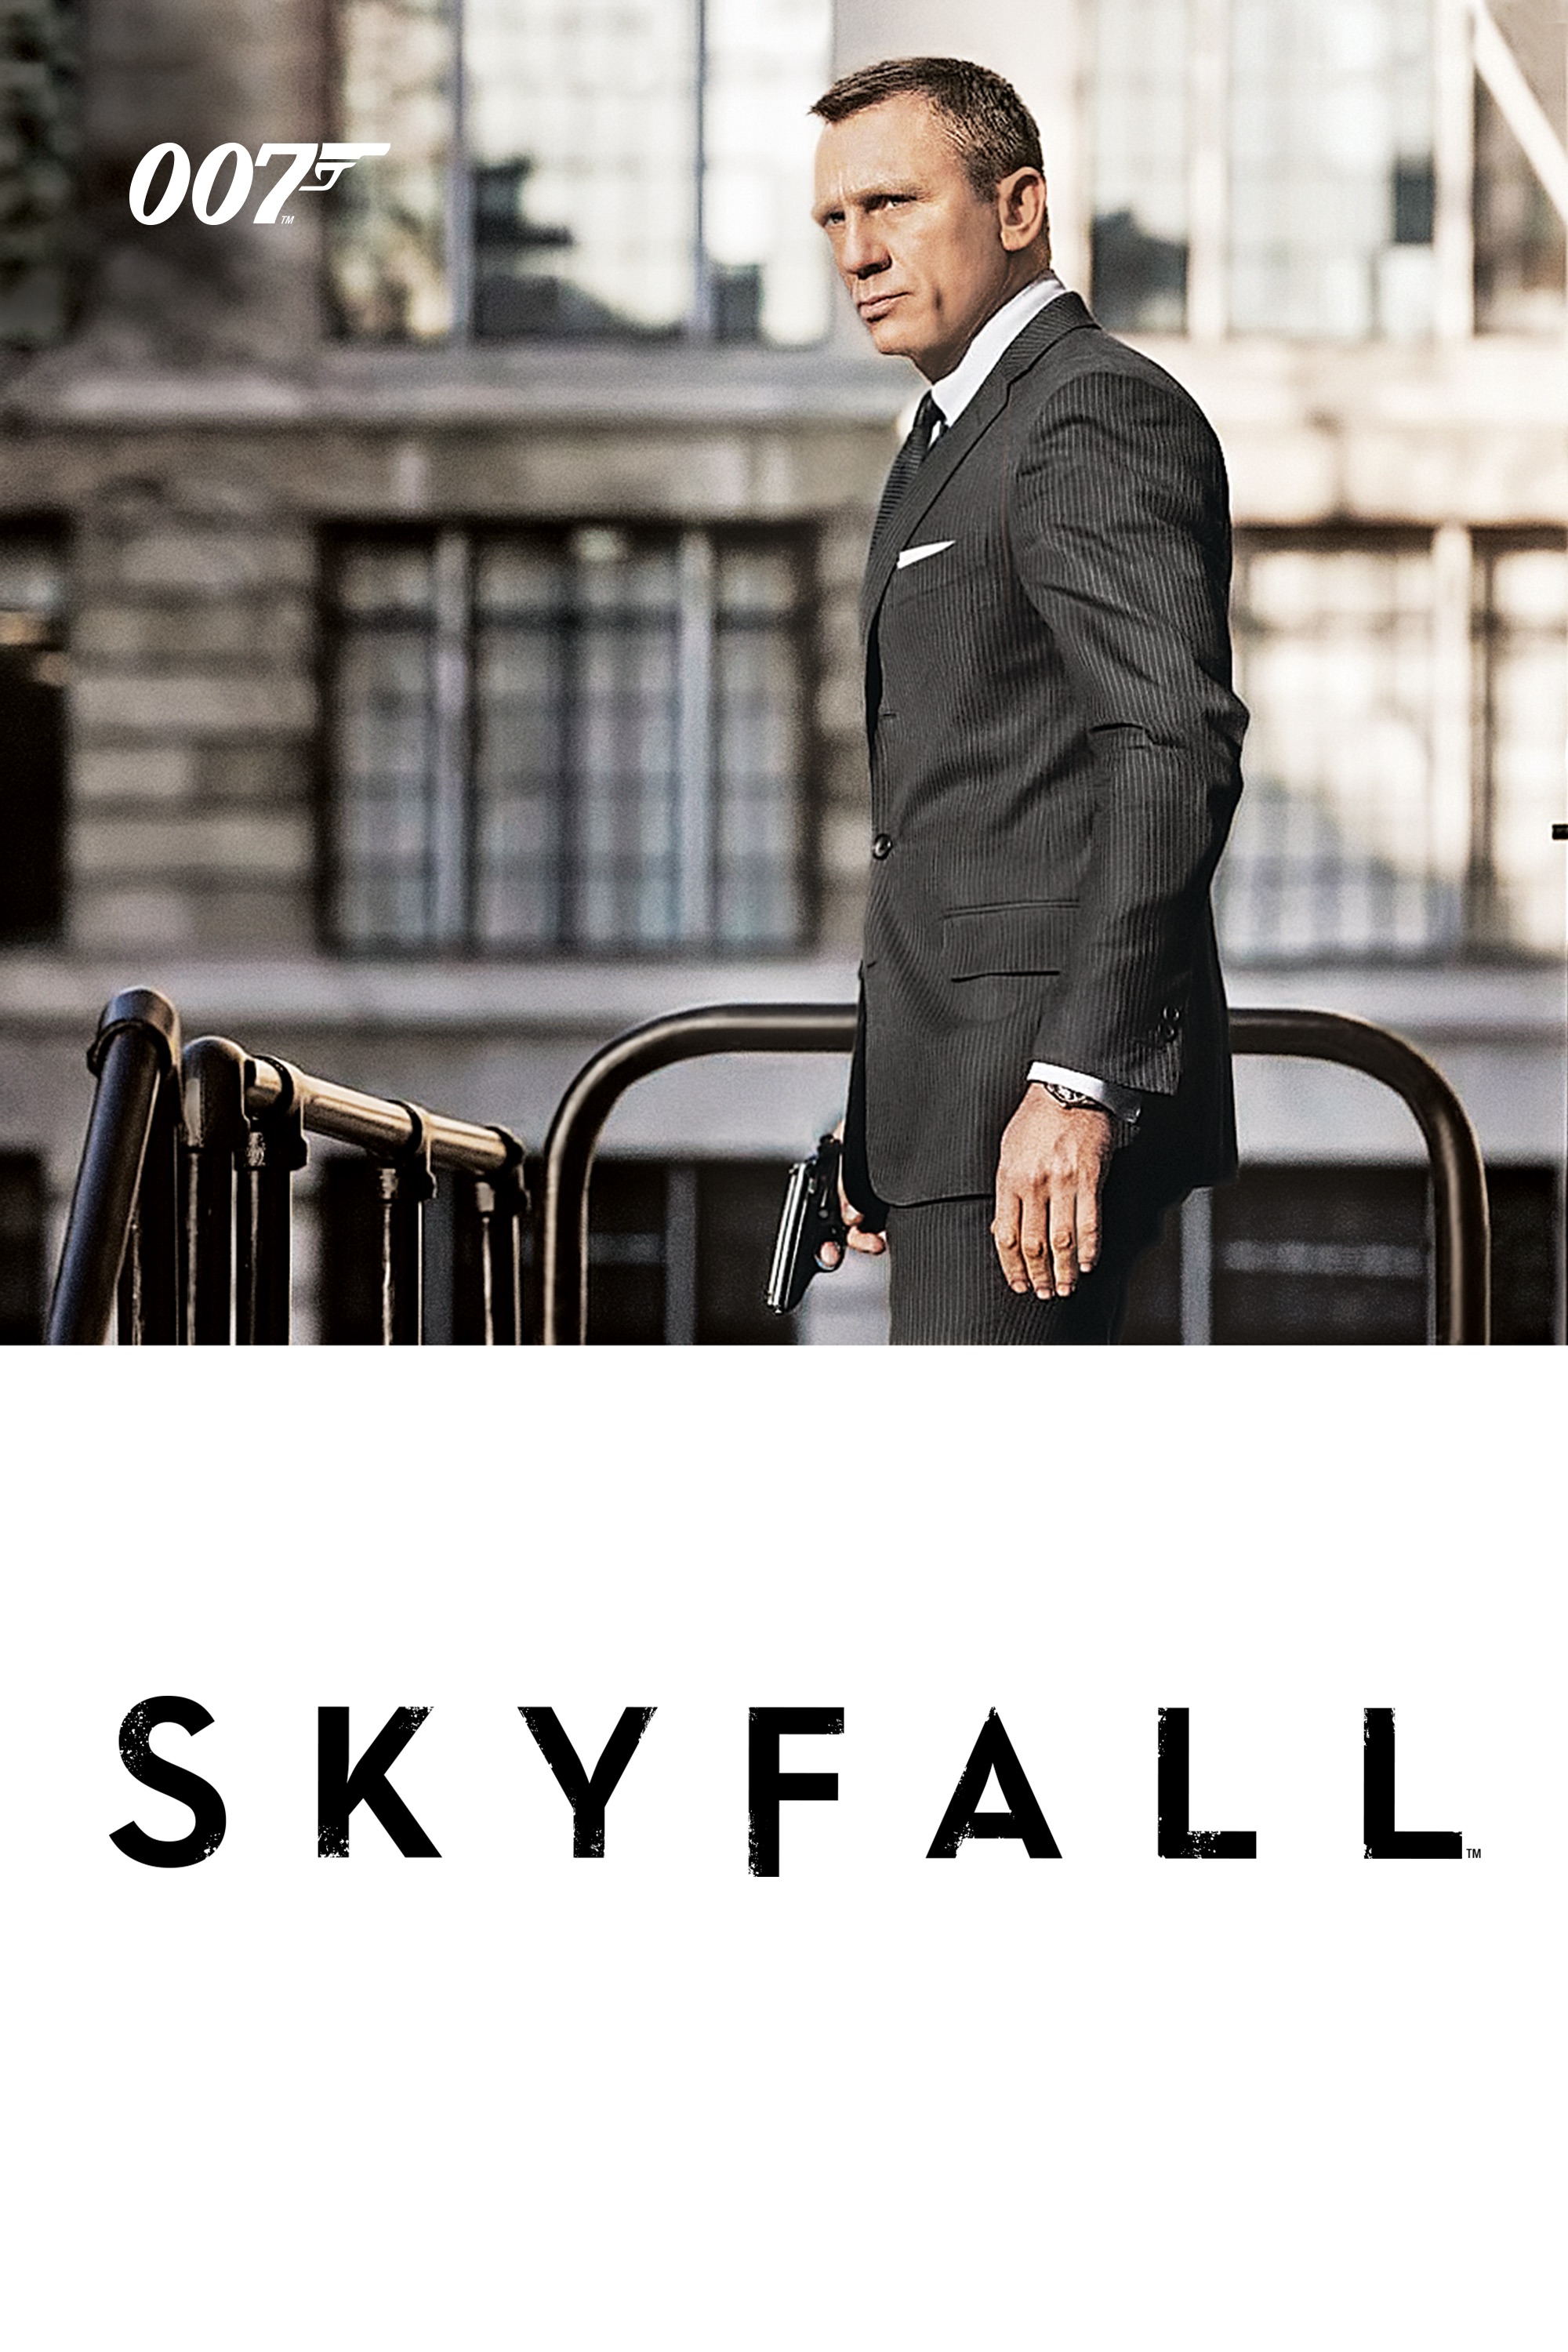 Skyfall download the last version for iphone